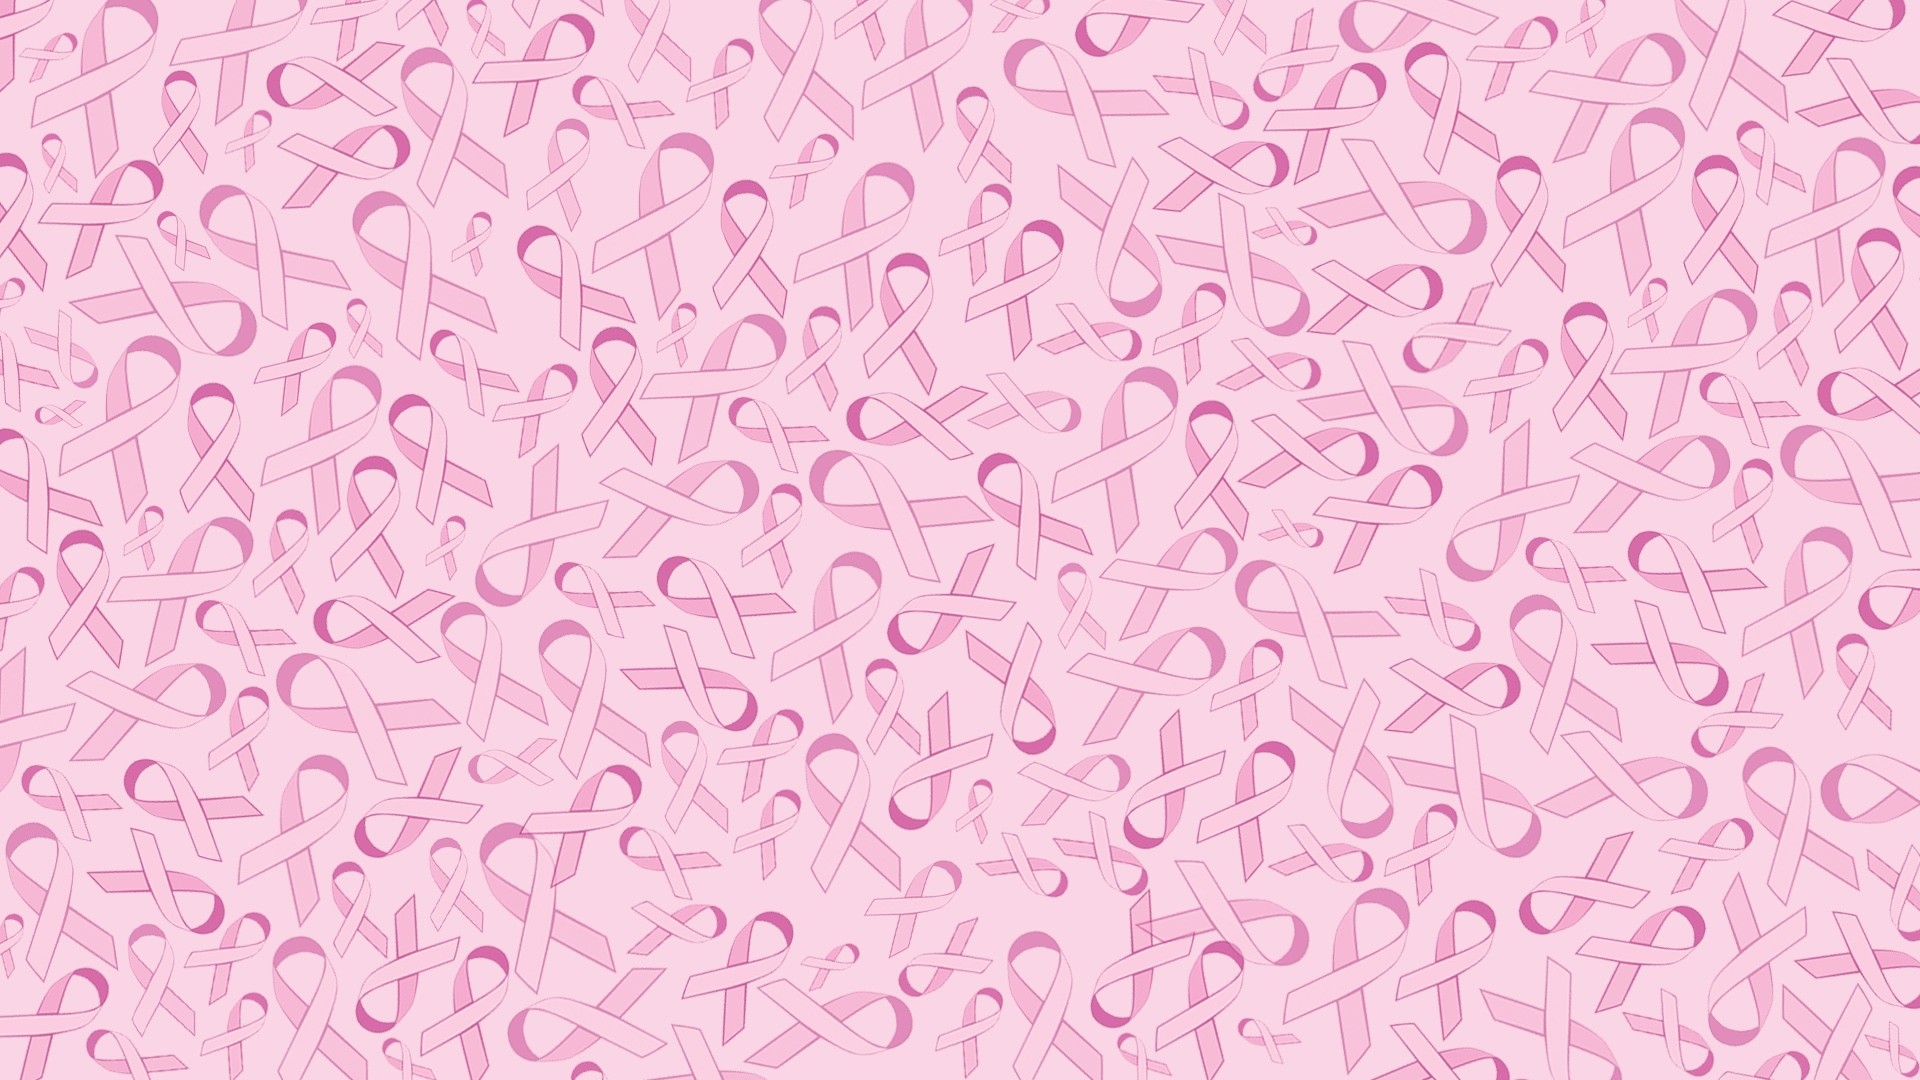 1920x1080 Breast Cancer Awareness Wallpaper Hd within Breast Cancer Awareness  Wallpaper